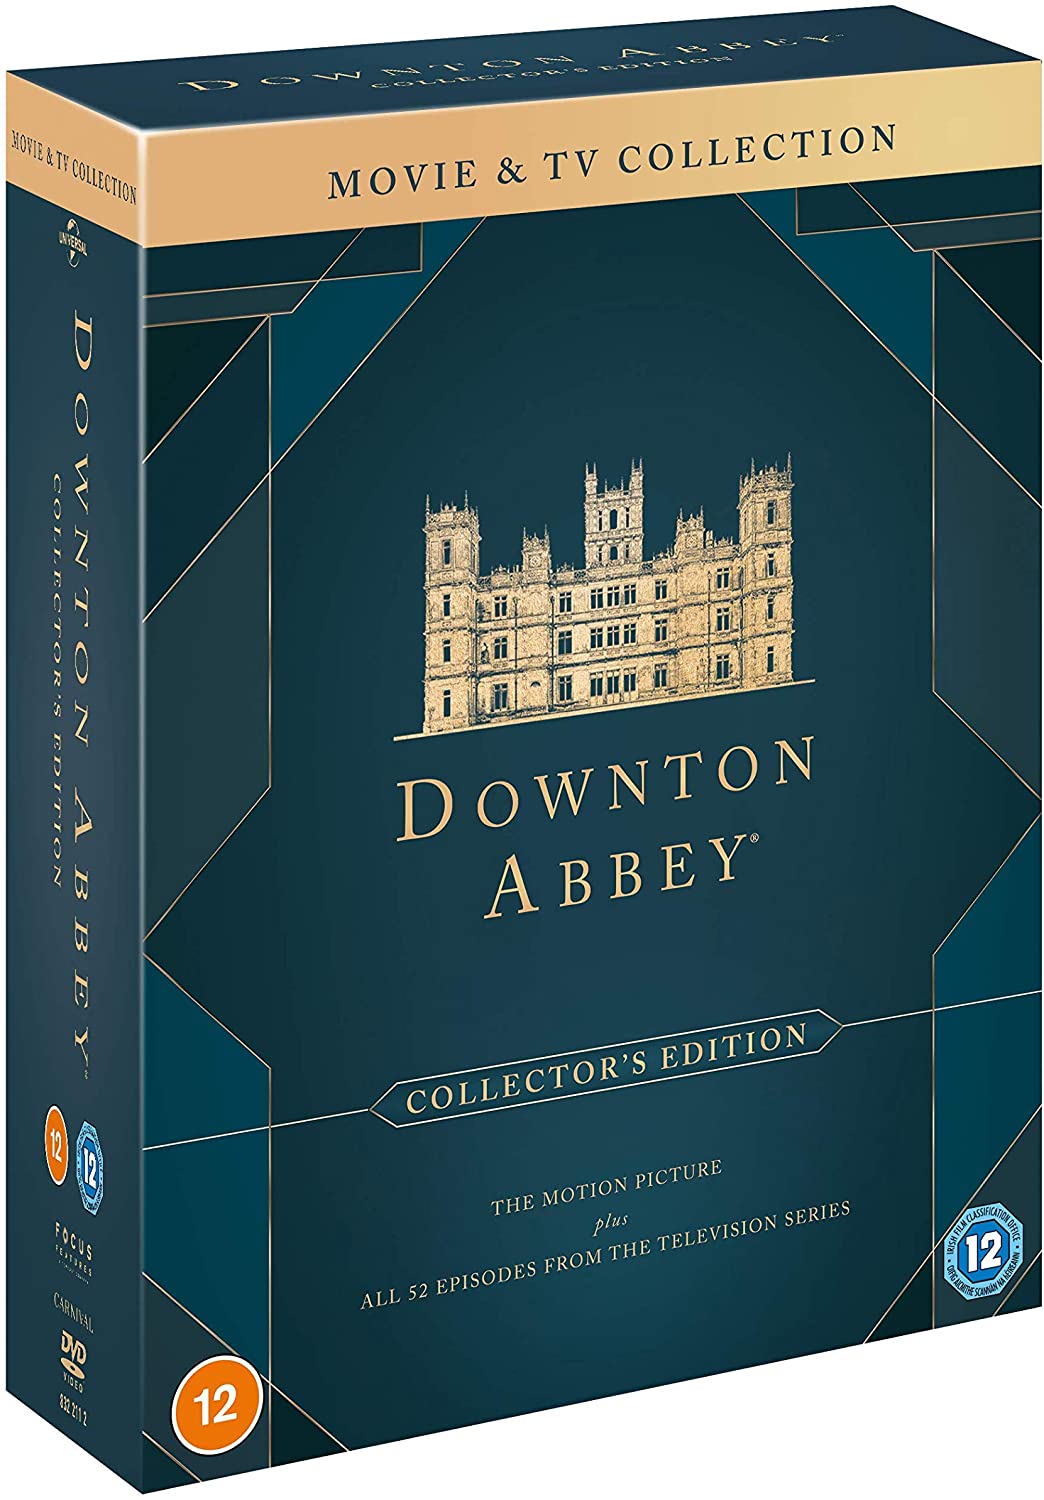 Downton Abbey: Movie And TV Collection [Collector's Edition] (DVD)